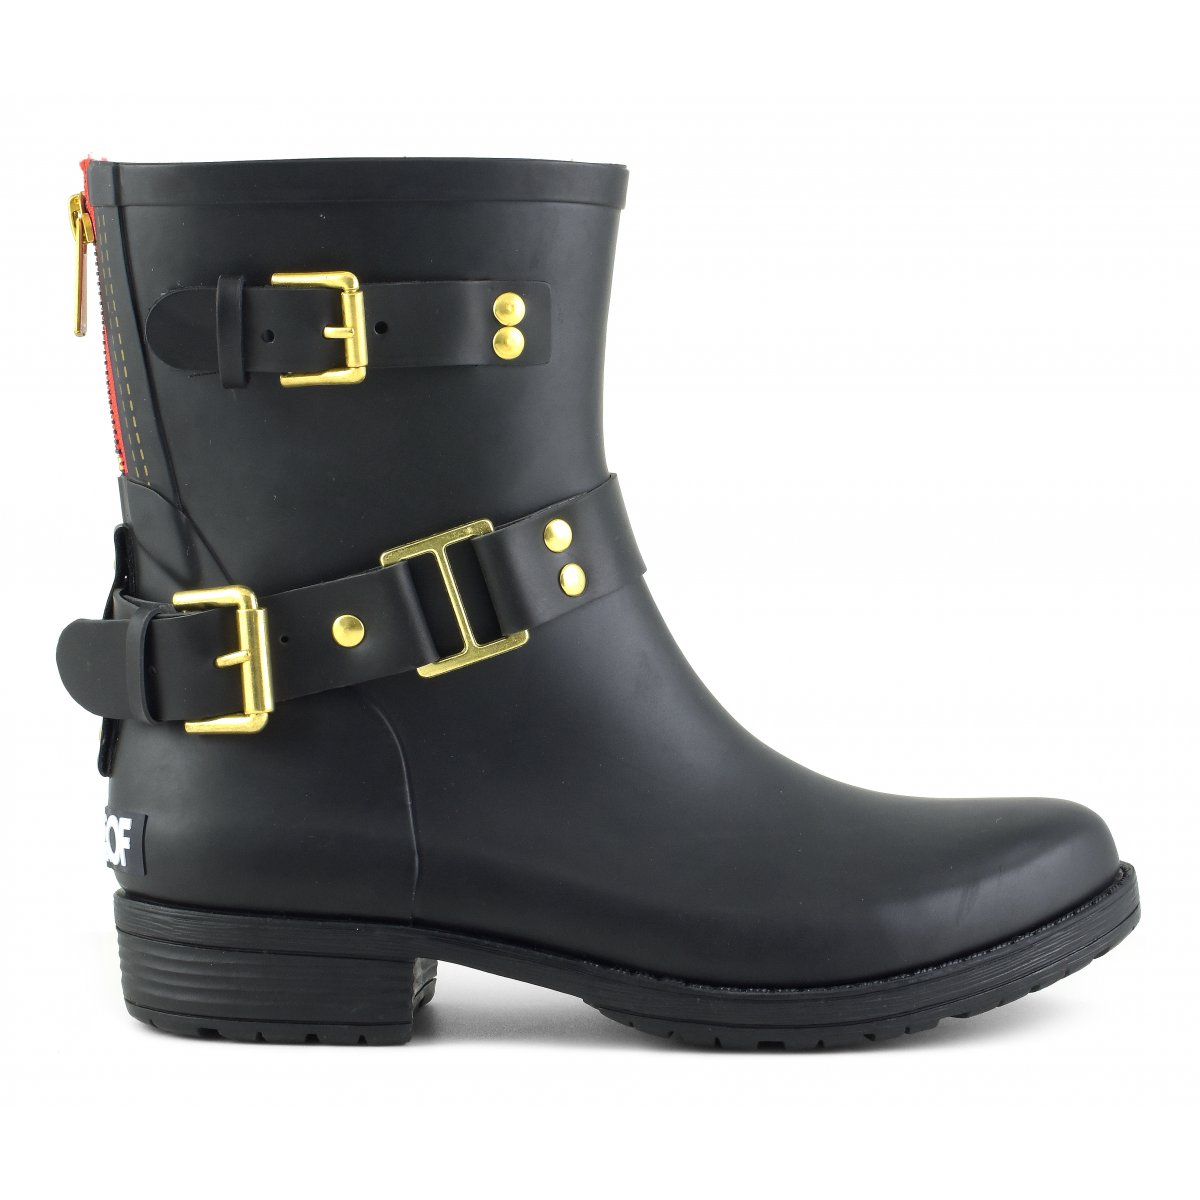 rain boots with buckles